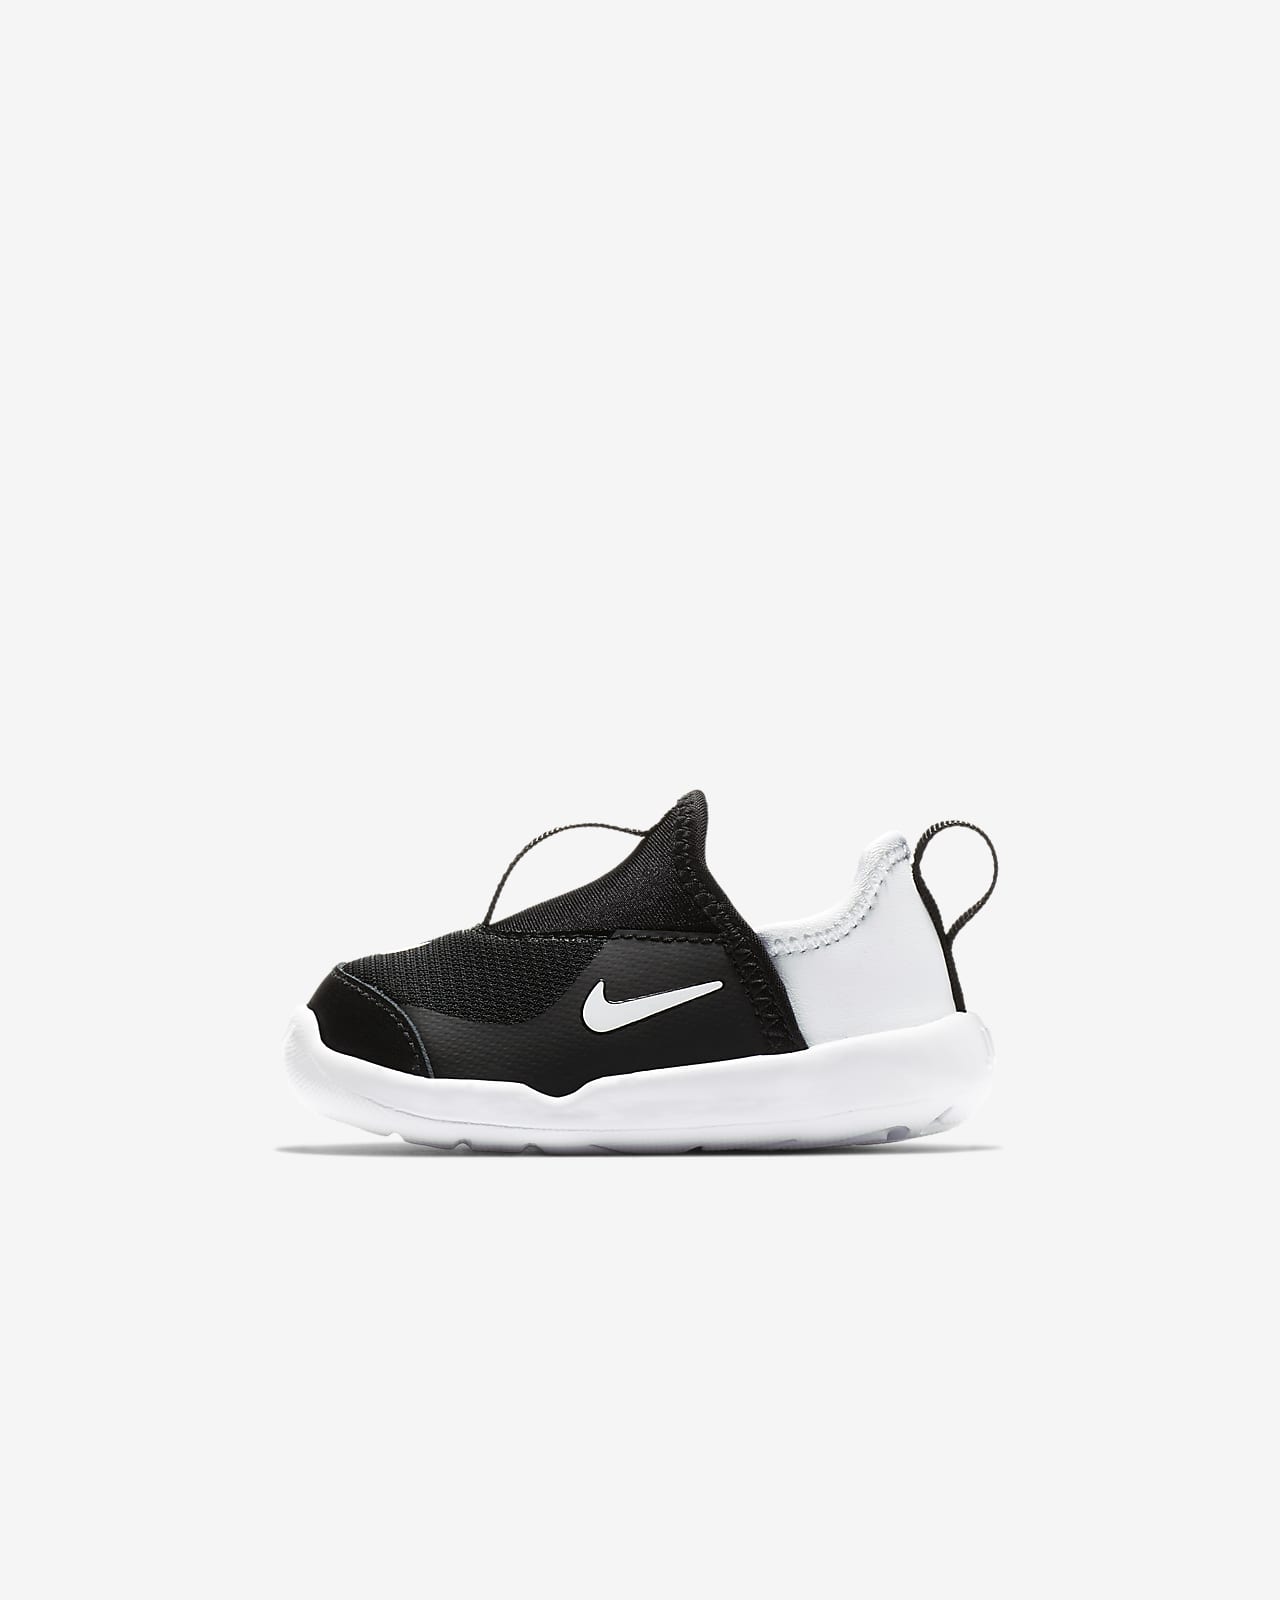 nike swoosh for shoes